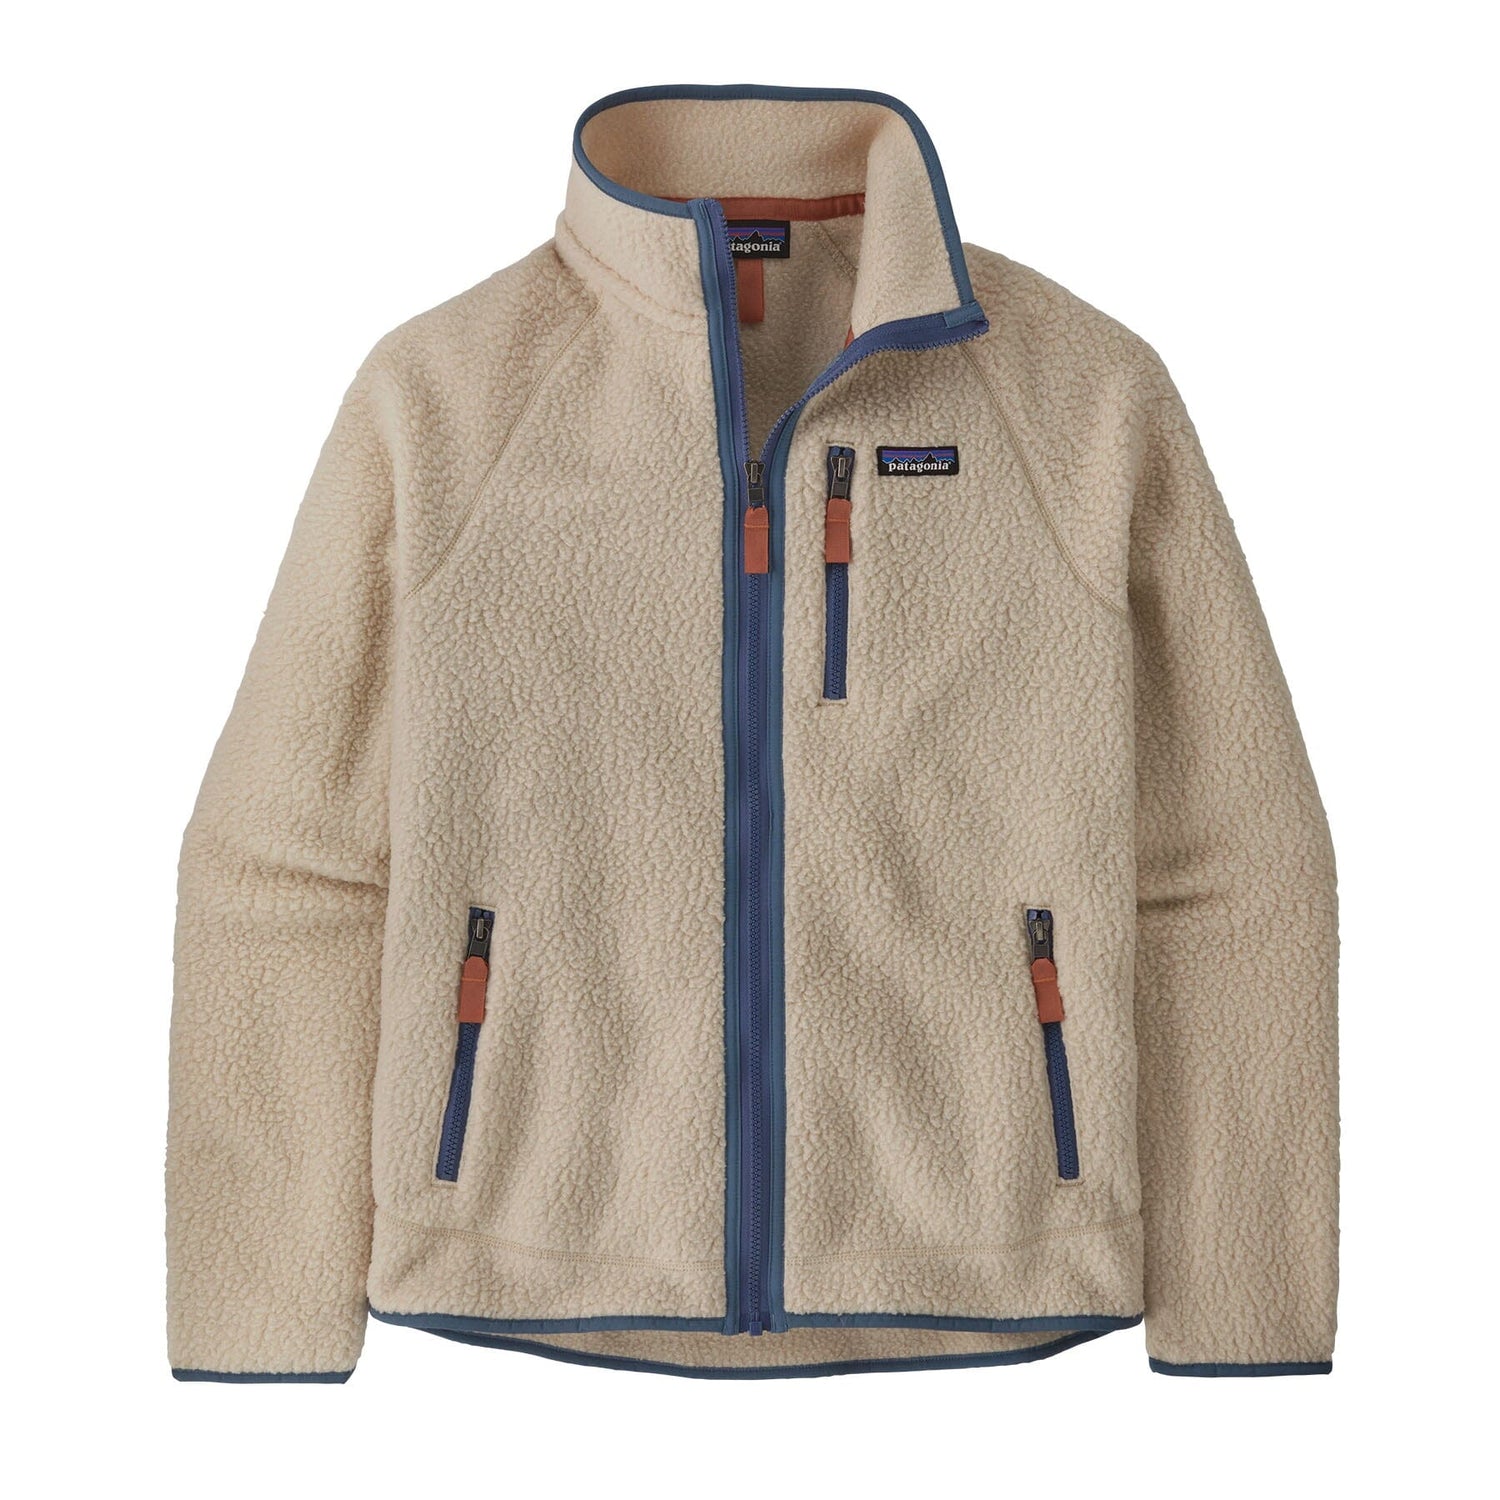 Patagonia M's Retro Pile Jacket - 100 % Recycled Polyester Dark Natural w/Utility Blue Jacket